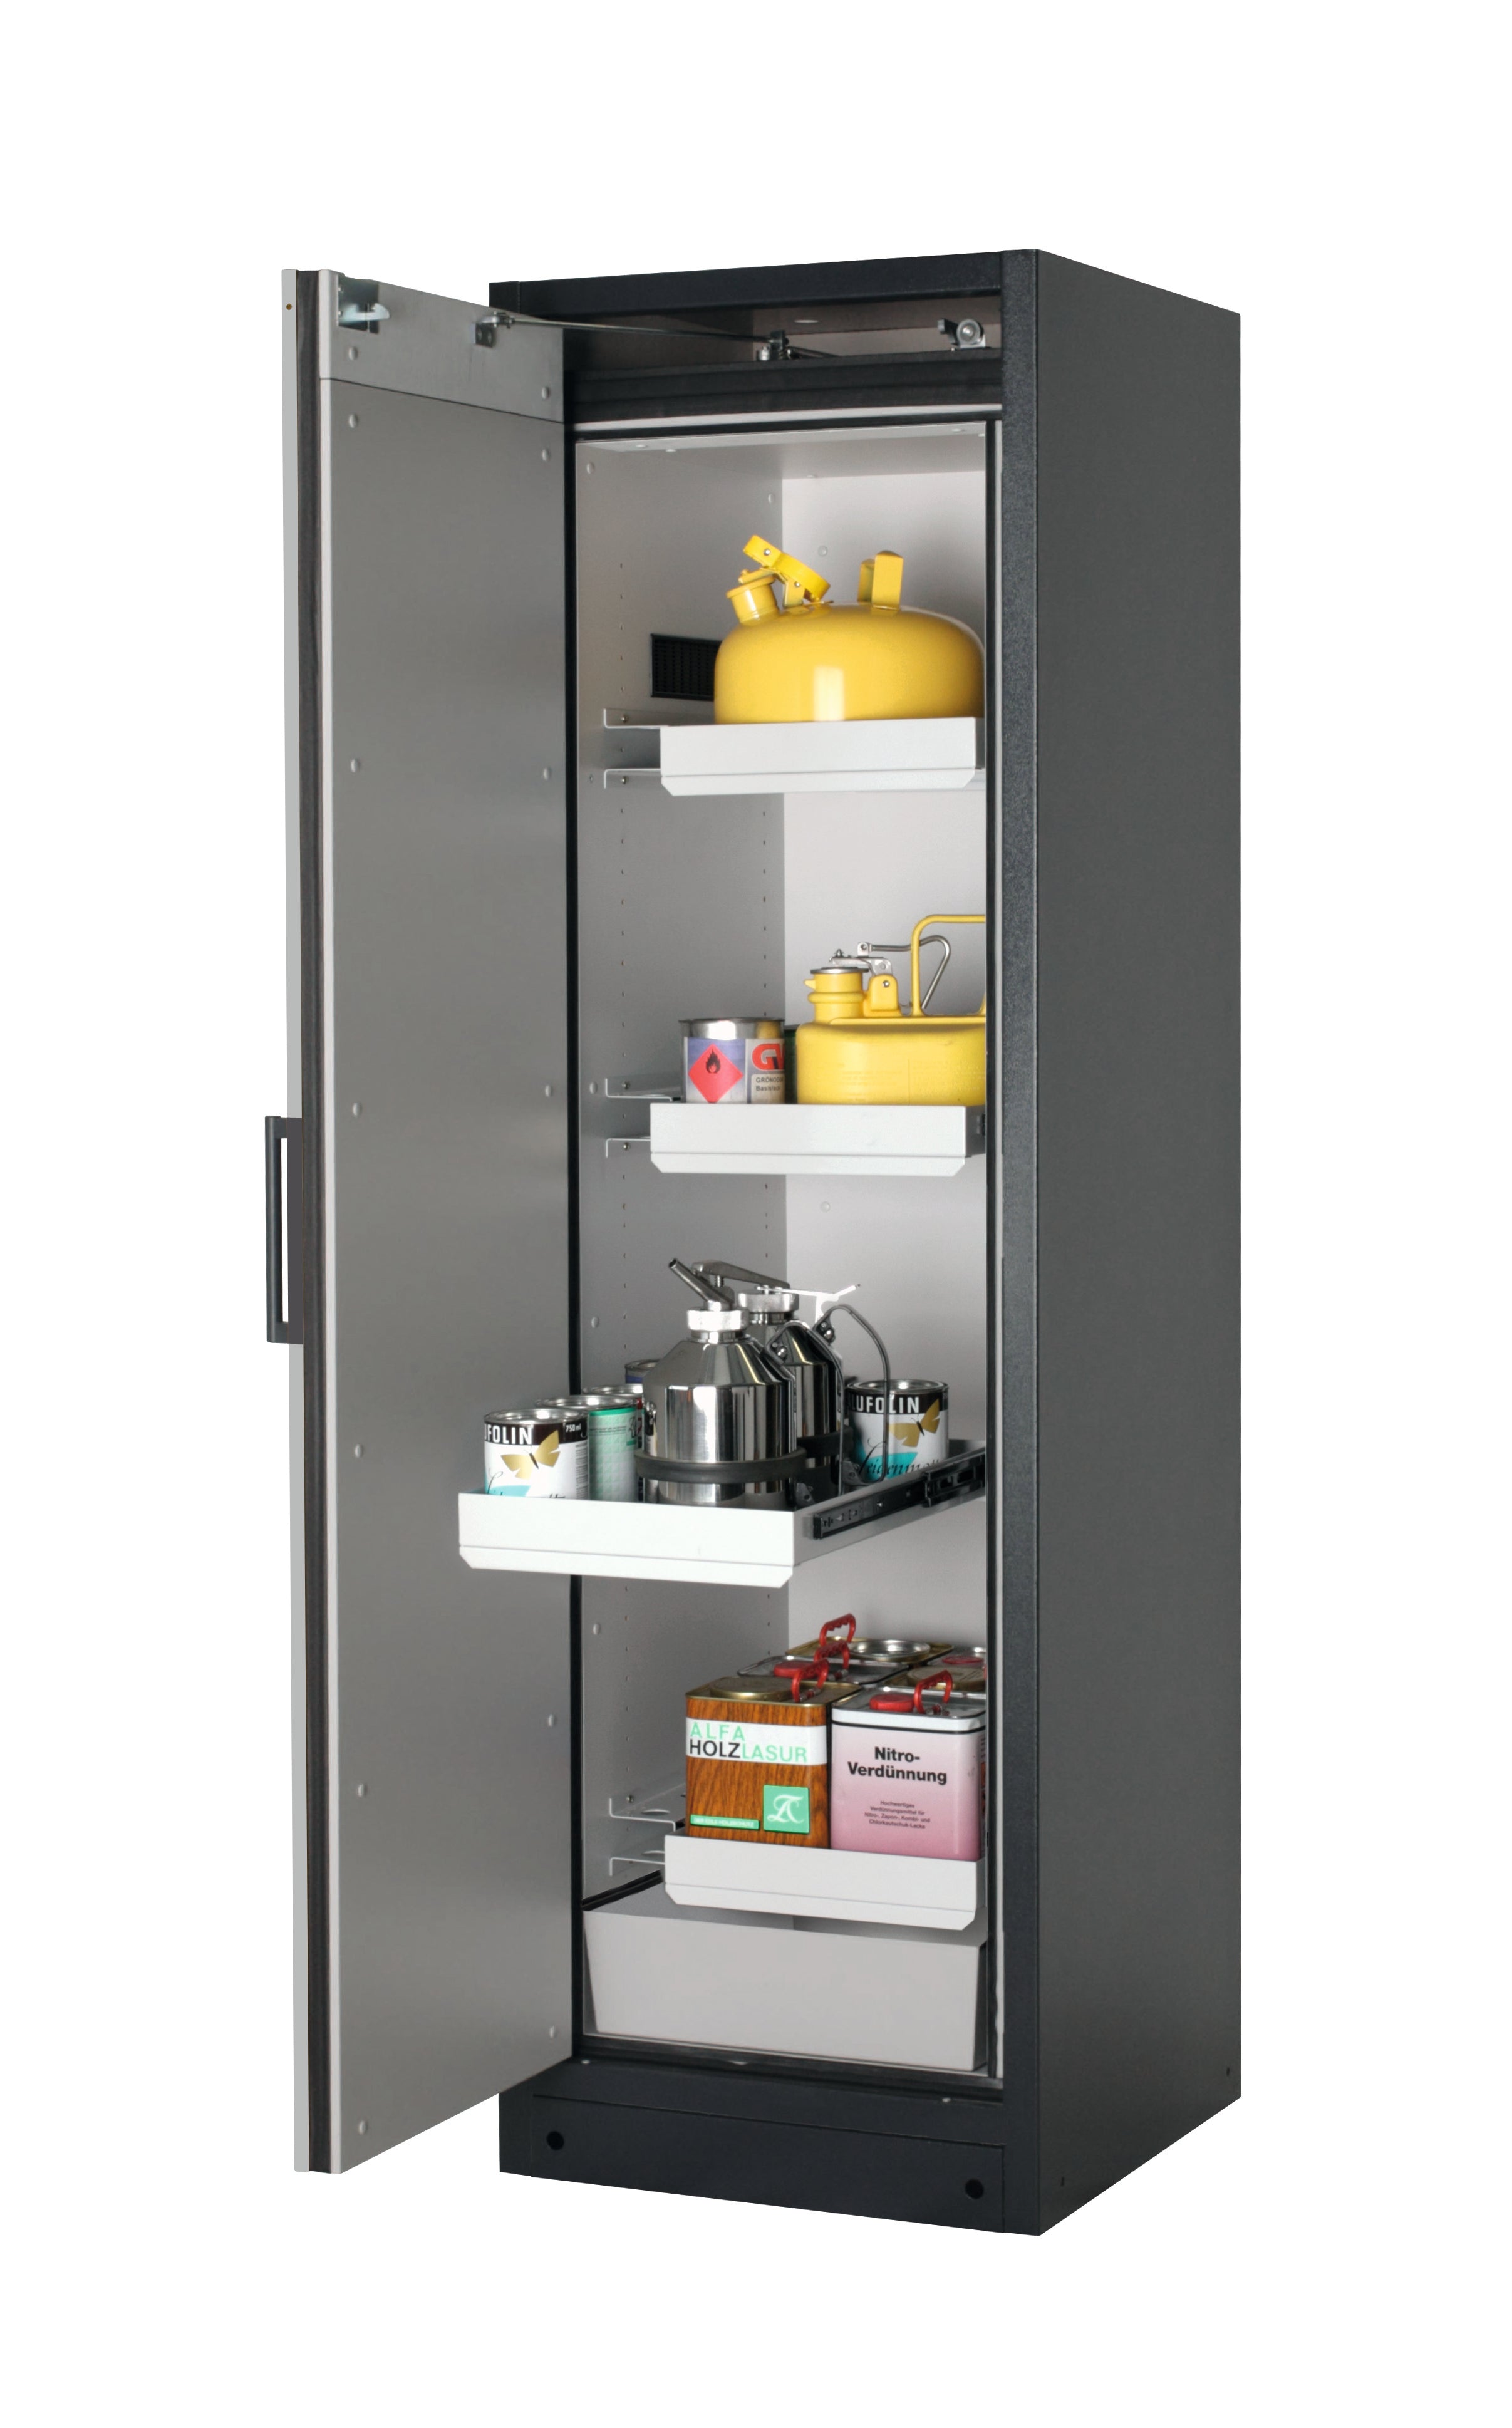 Type 90 safety storage cabinet Q-PEGASUS-90 model Q90.195.060.WDAC in pure white RAL 9010 with 3x drawer (standard) (sheet steel),